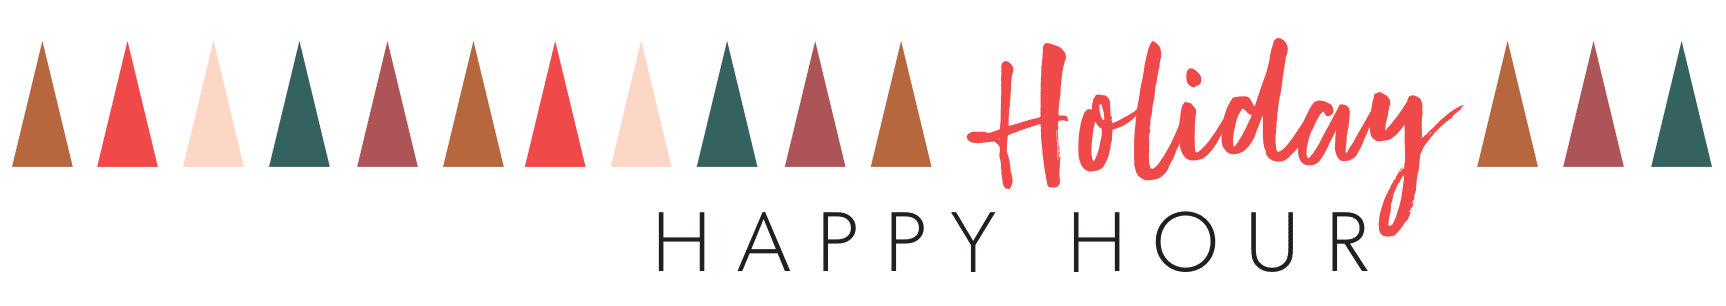 Holiday Happy Hour graphic